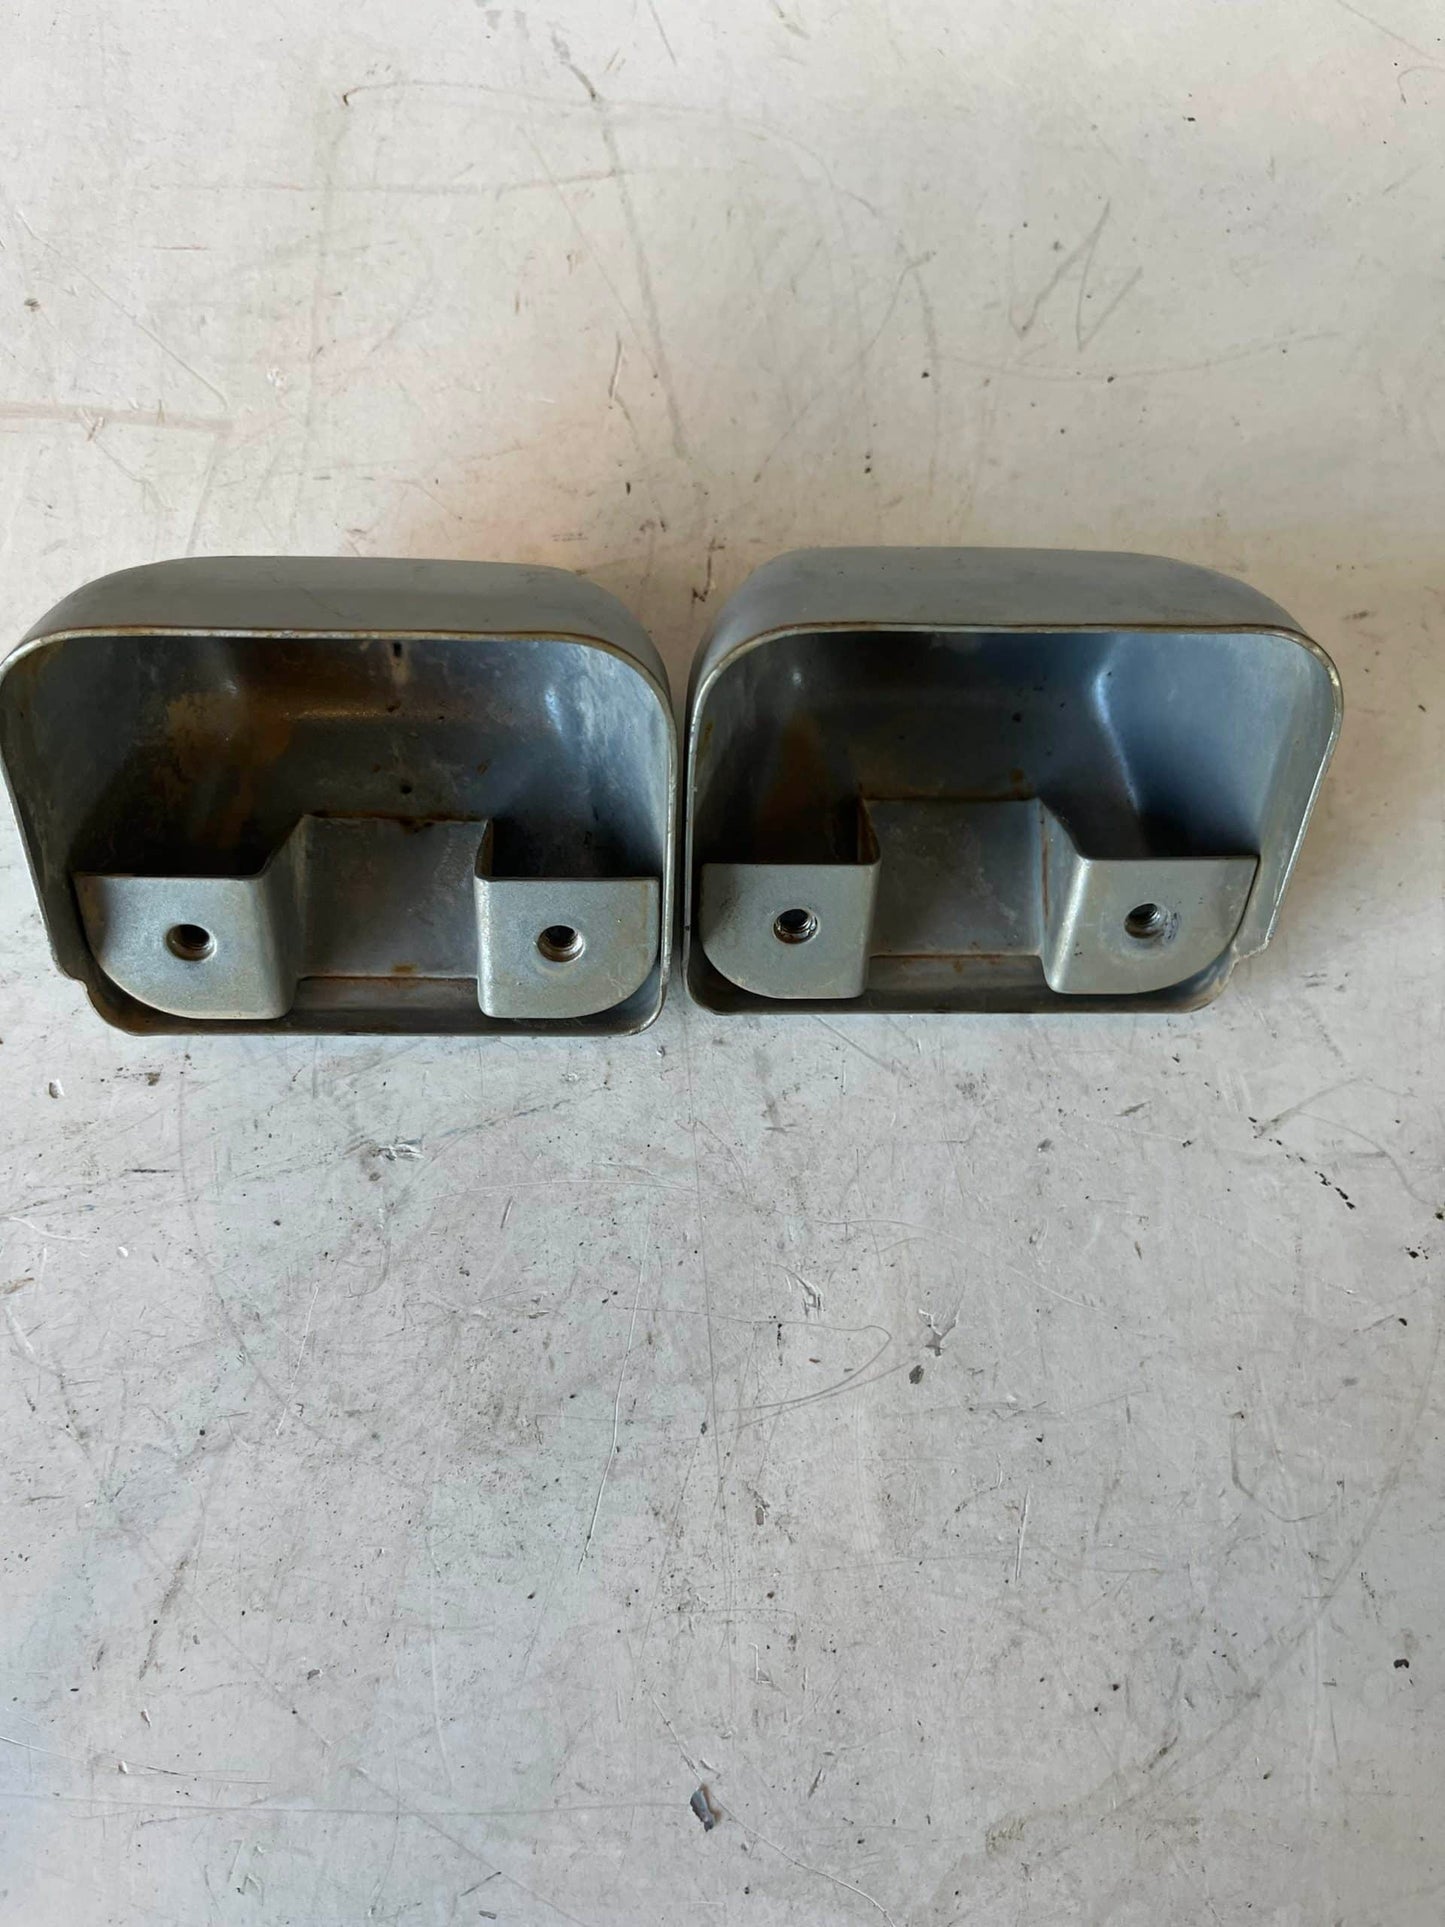 Used Pair of 1975 and Later License Plate Light Covers